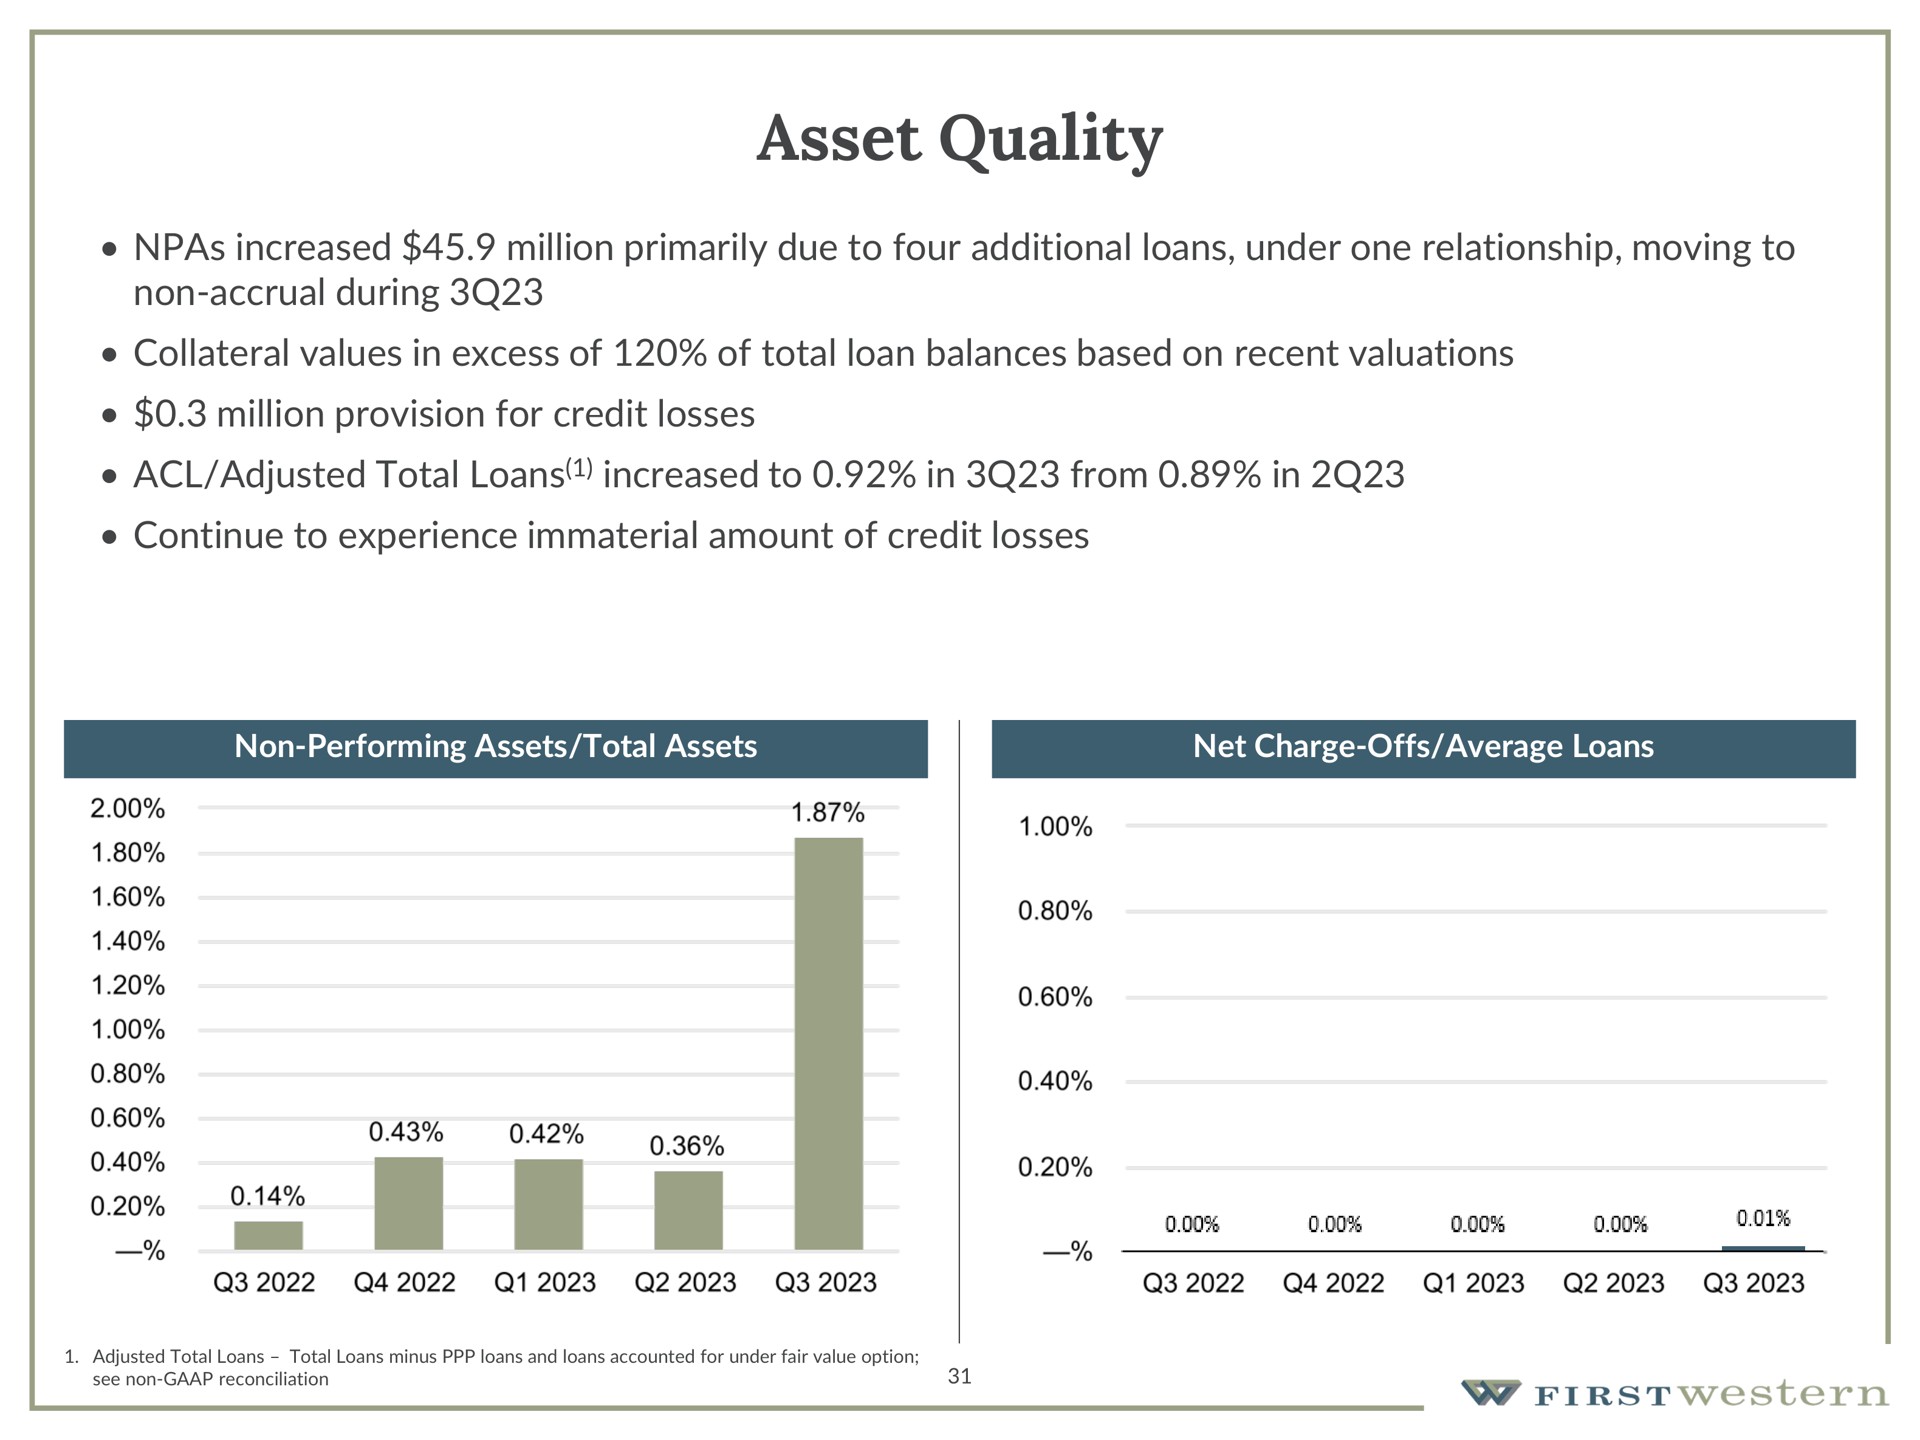 asset quality | First Western Financial